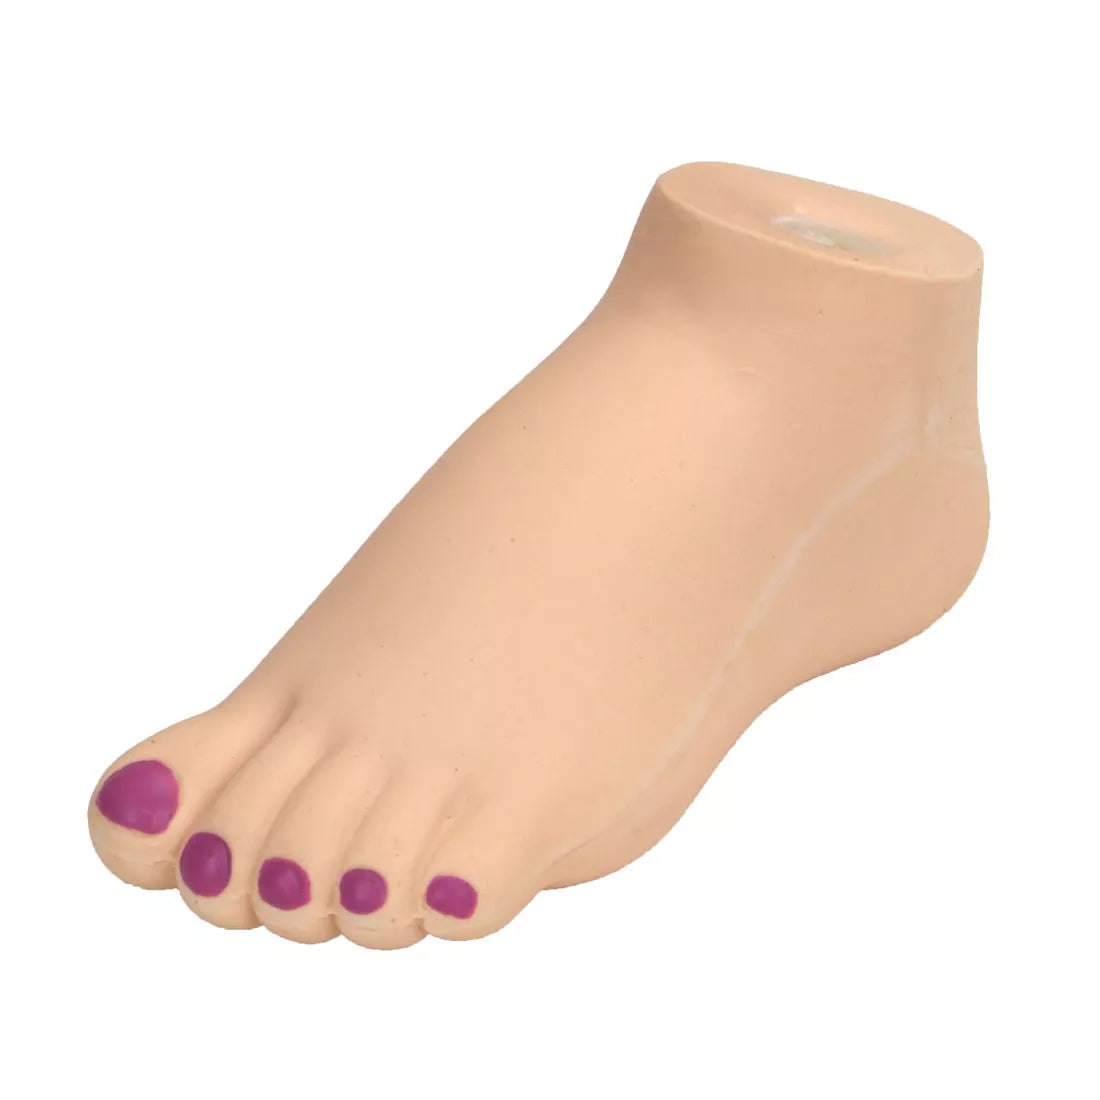 Foot Latex Dog Toy